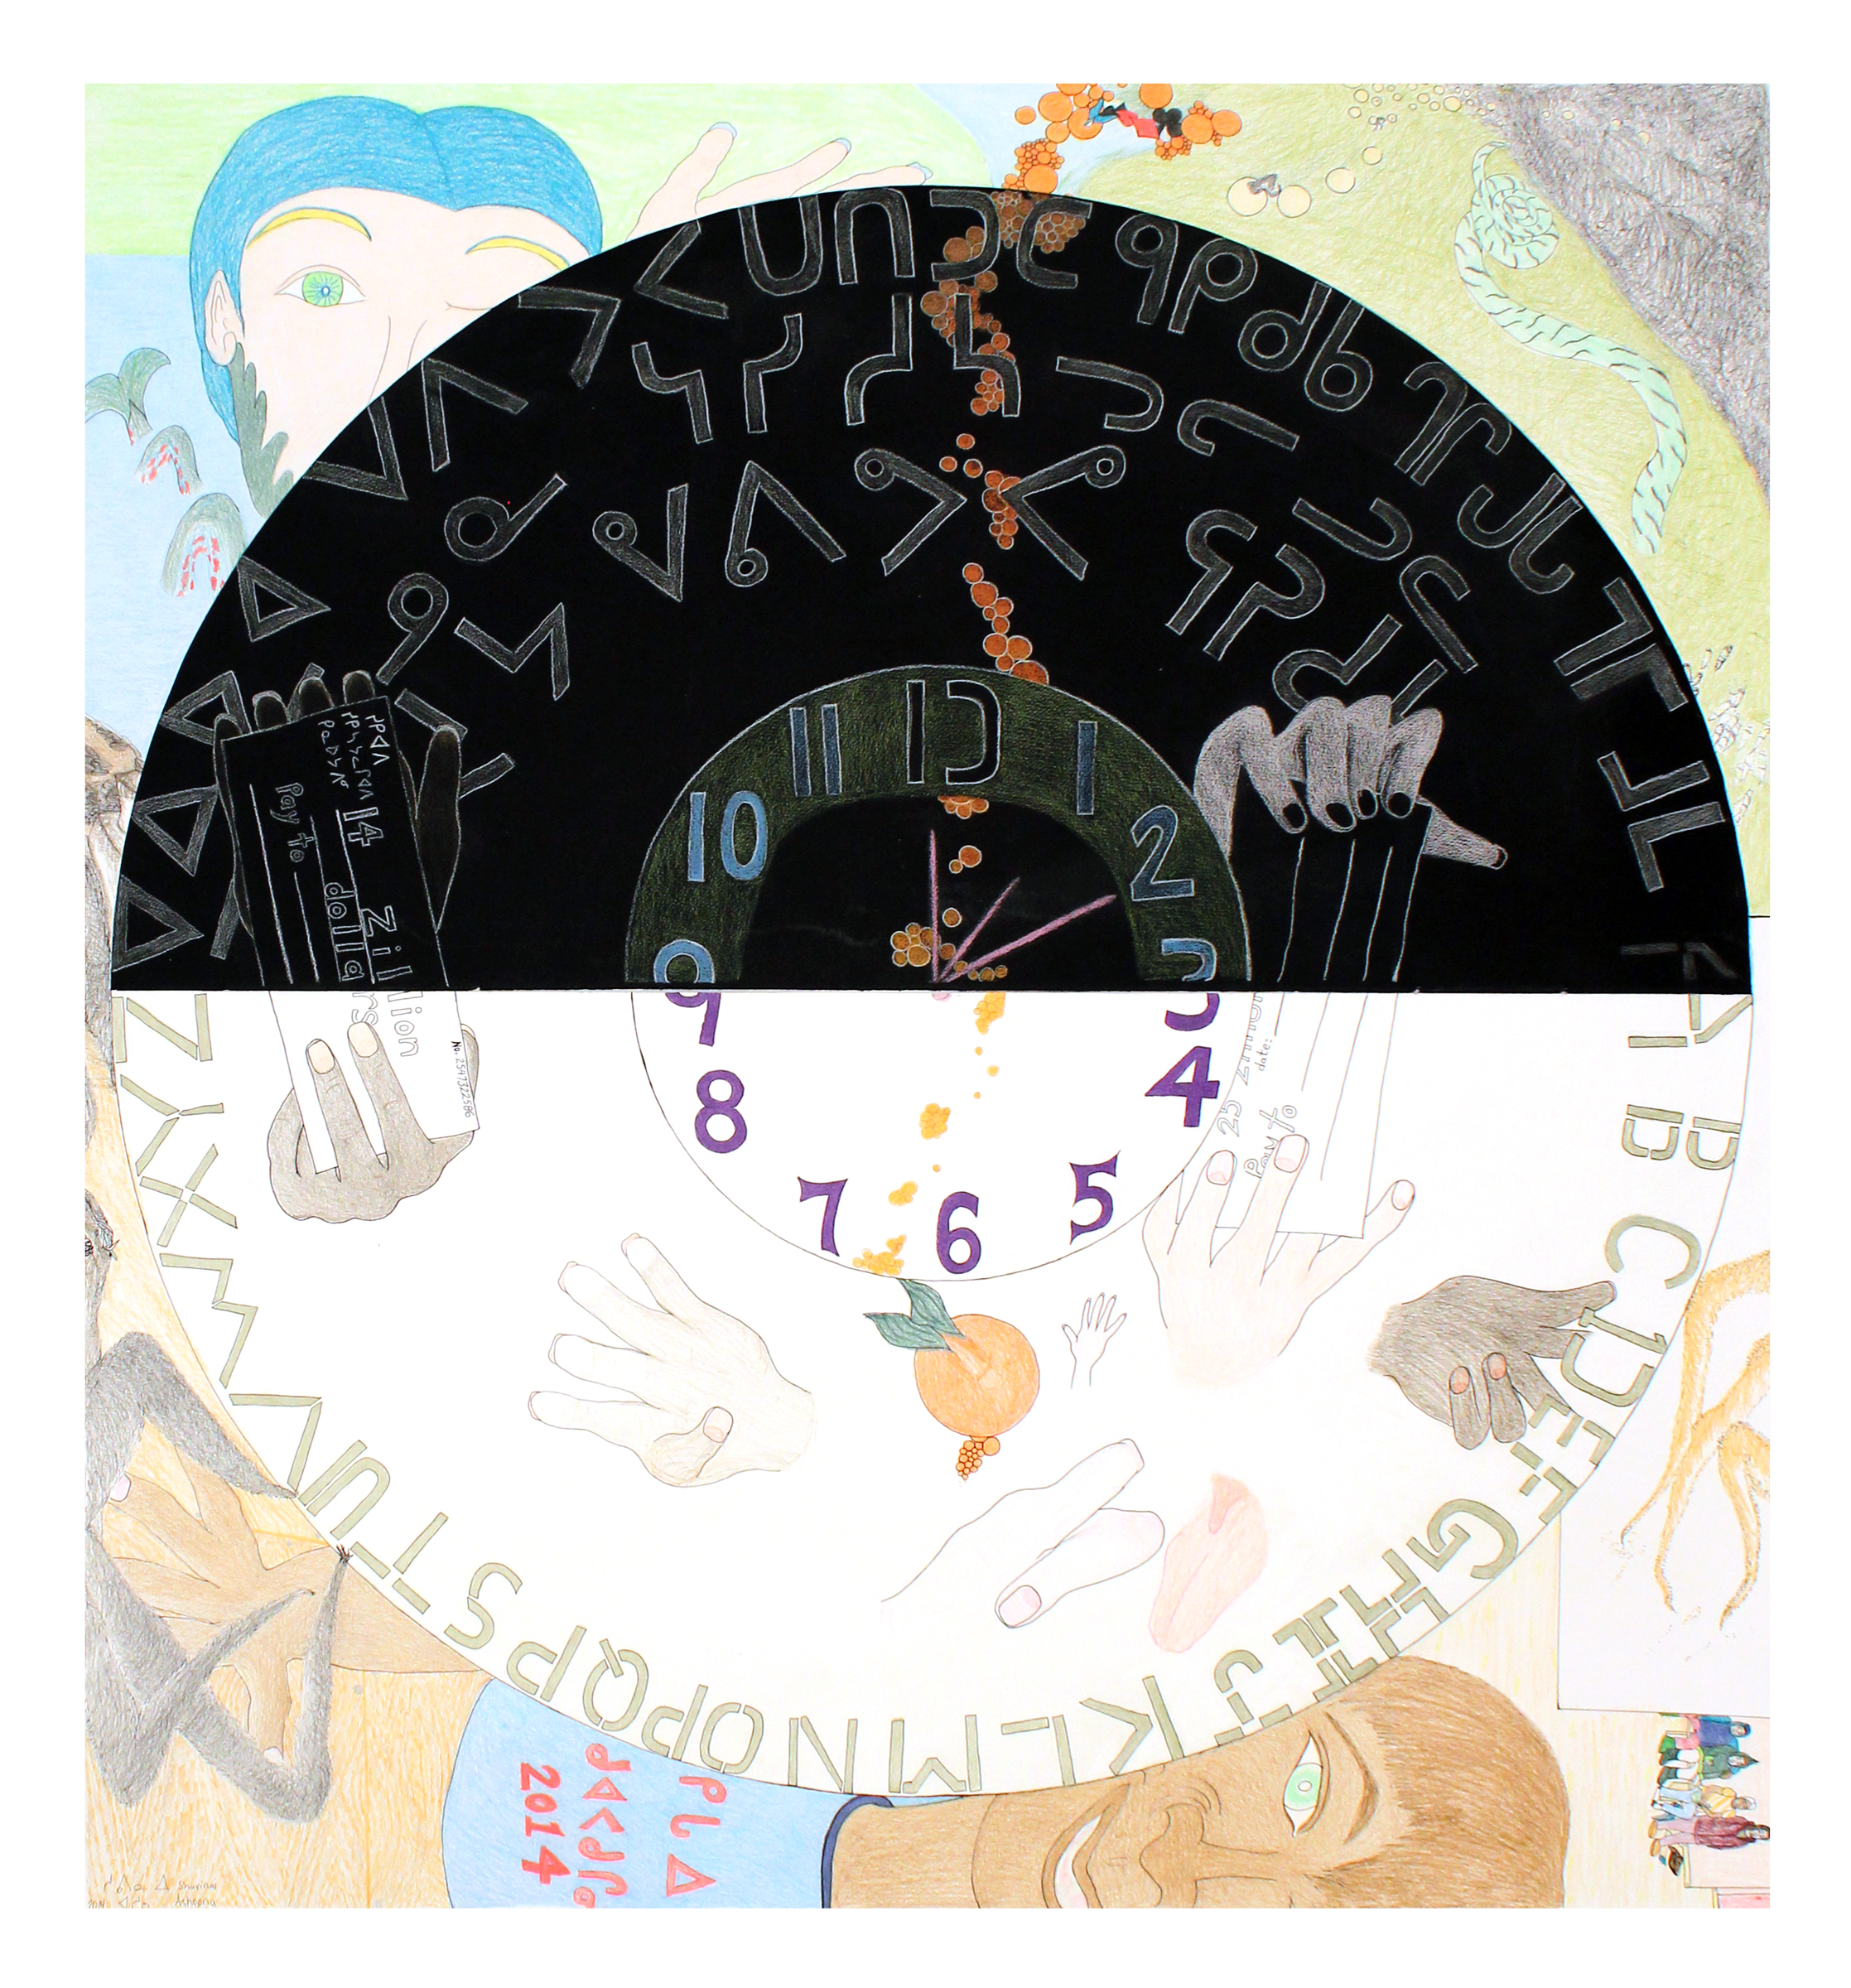 Shuvinai Ashoona's Composition (Clock) is a coloured pencil drawing featuring a large circular form split between black upper and white lower sections marked with Inukitut syllabics and Arabic numerals, surrounded by soft coloured drawings of the sea goddess Sedna and other figures